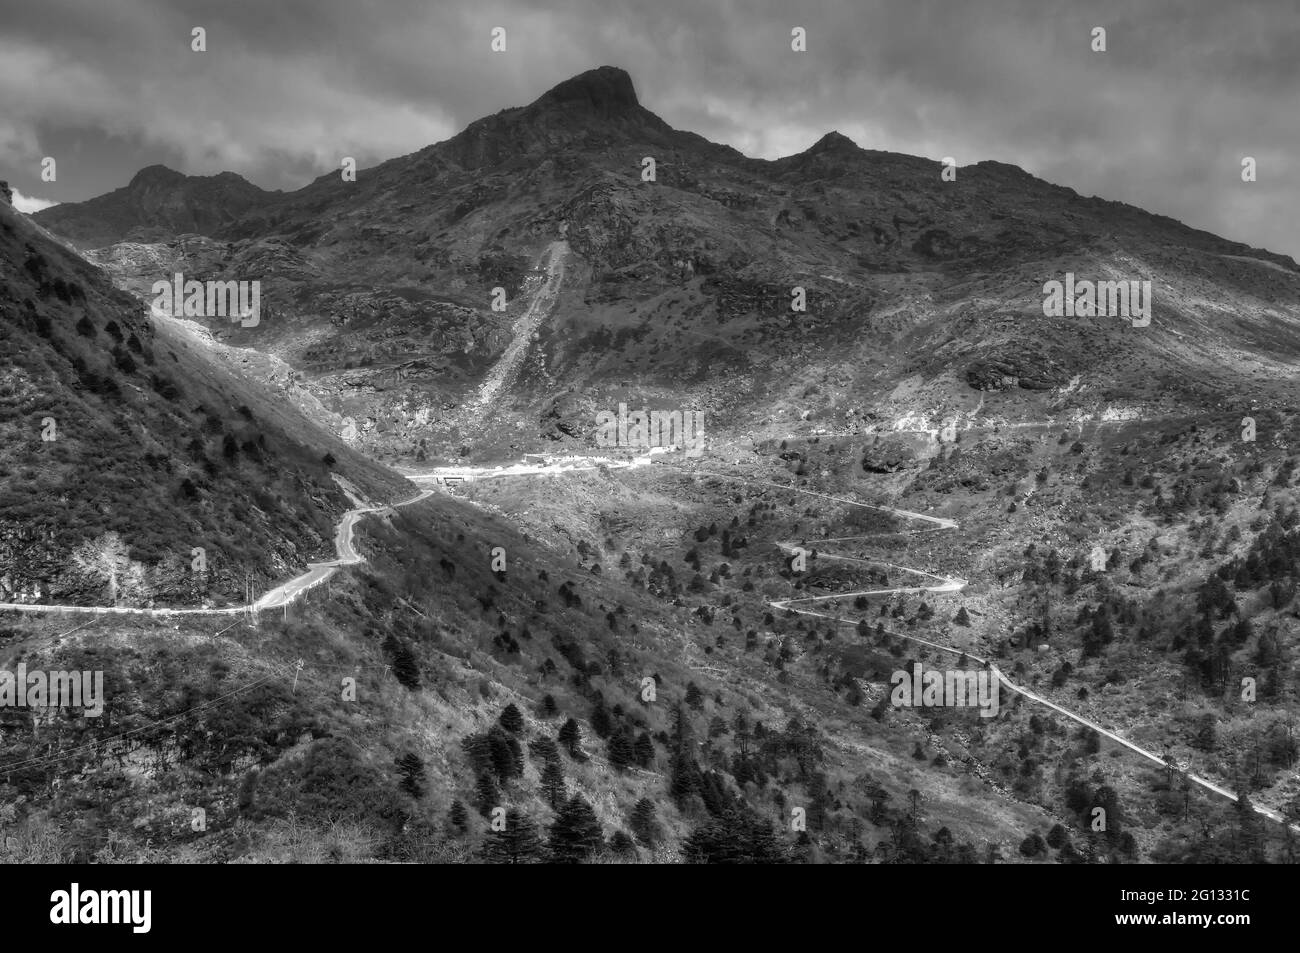 Beautiful famous curvy roads on Old Silk Route, Silk trading route between China and India, Sikkim - black and white image Stock Photo